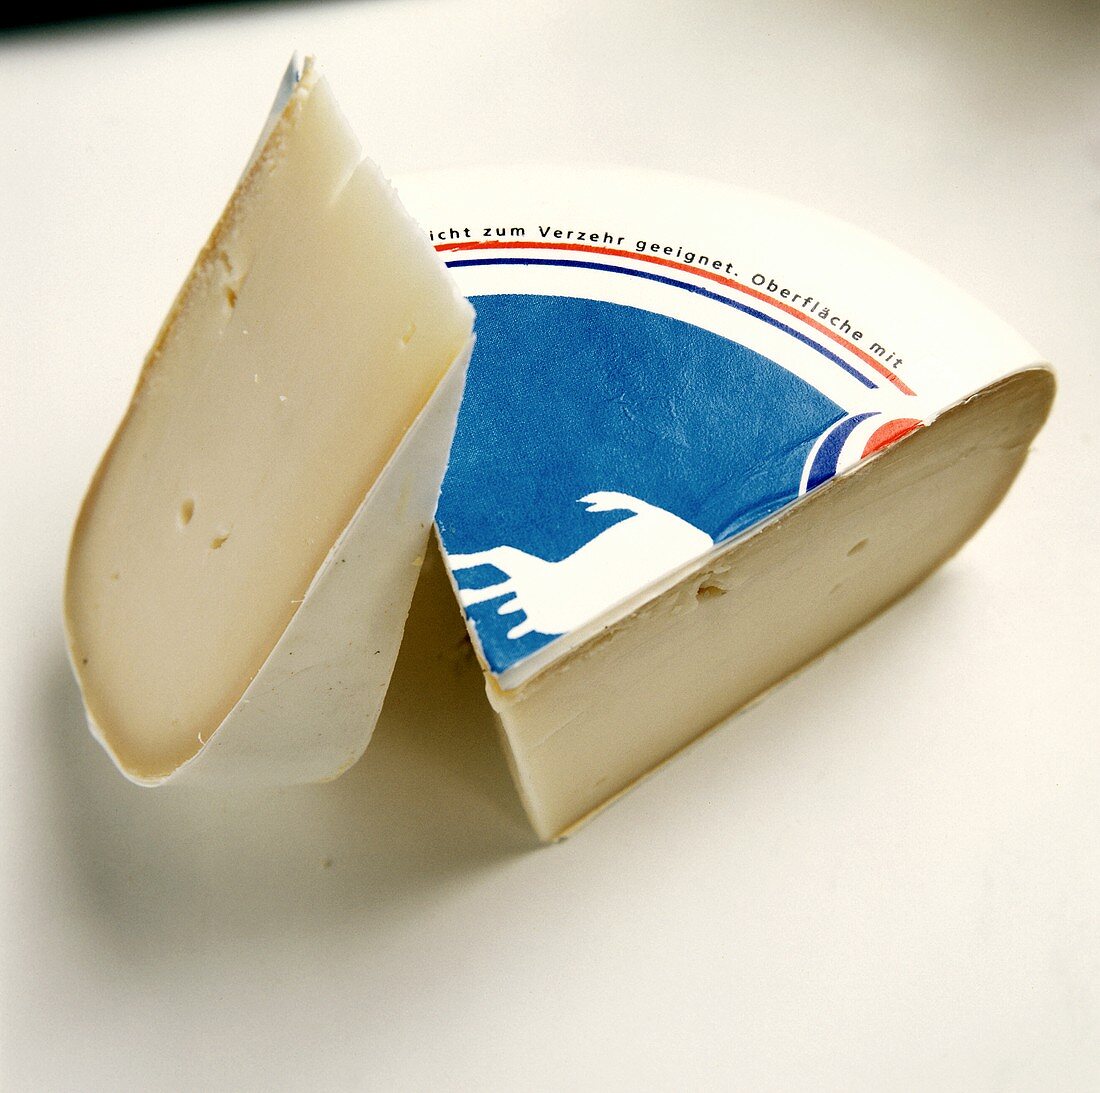 Two Wedges of Packaged Gouda Cheese